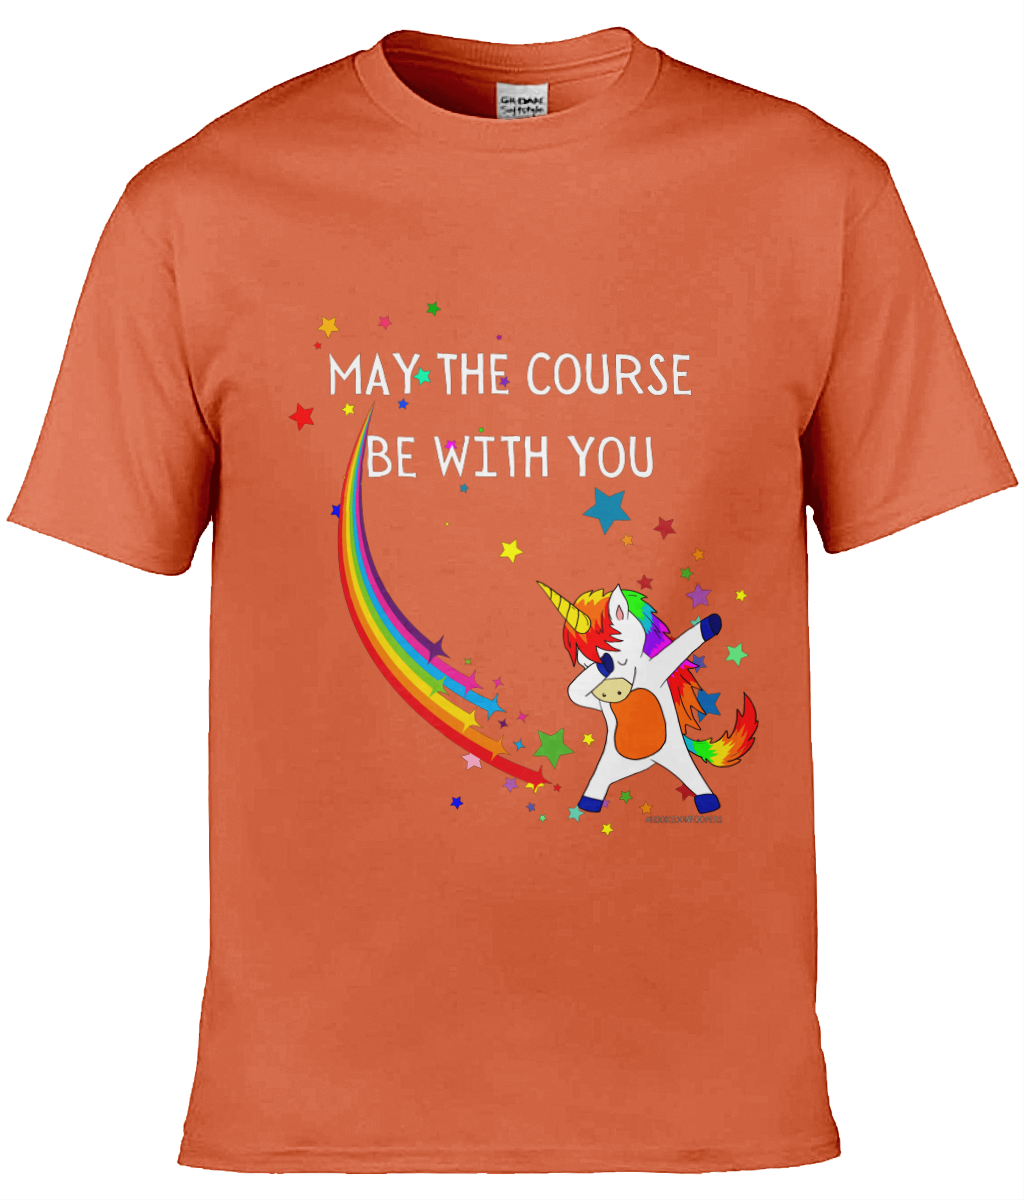 May the Course Tee Shirt